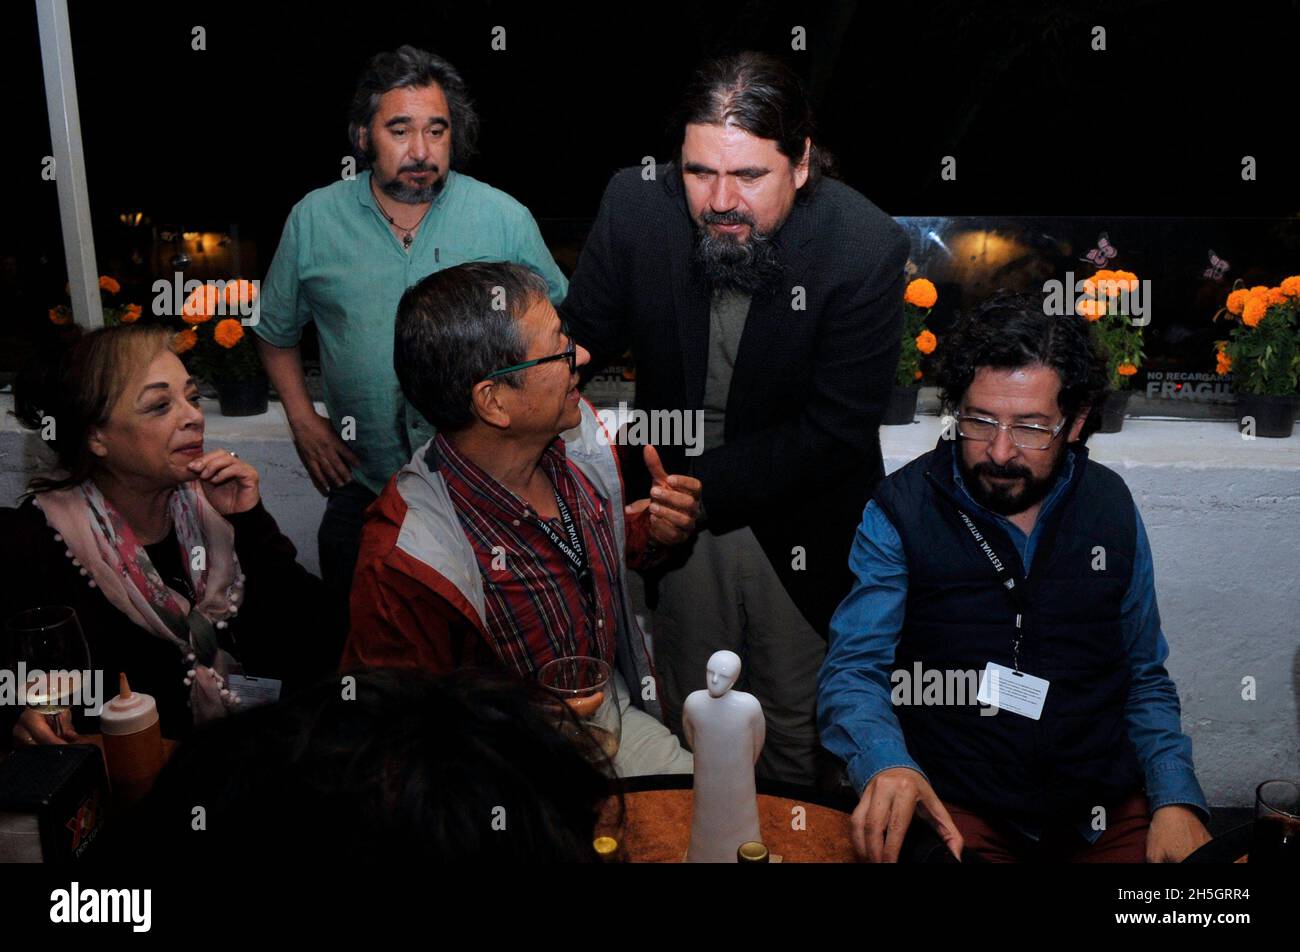 MORELIA , MÉXICO 1 November, 2021: Sonia Riquer, Sergio Raúl López, Carlos Bonfil, Jorge Caballero and Ramón Ramírez film writers during the award to Carlos Bonfil and delivery of the statuette of the Press Warrior to Journalistic Merit awarded by the Mexican Film Press Network during the 19th. Morelia International Film Festival. (Photo by Pedro Martin González Castillo/ NortePhoto Stock Photo